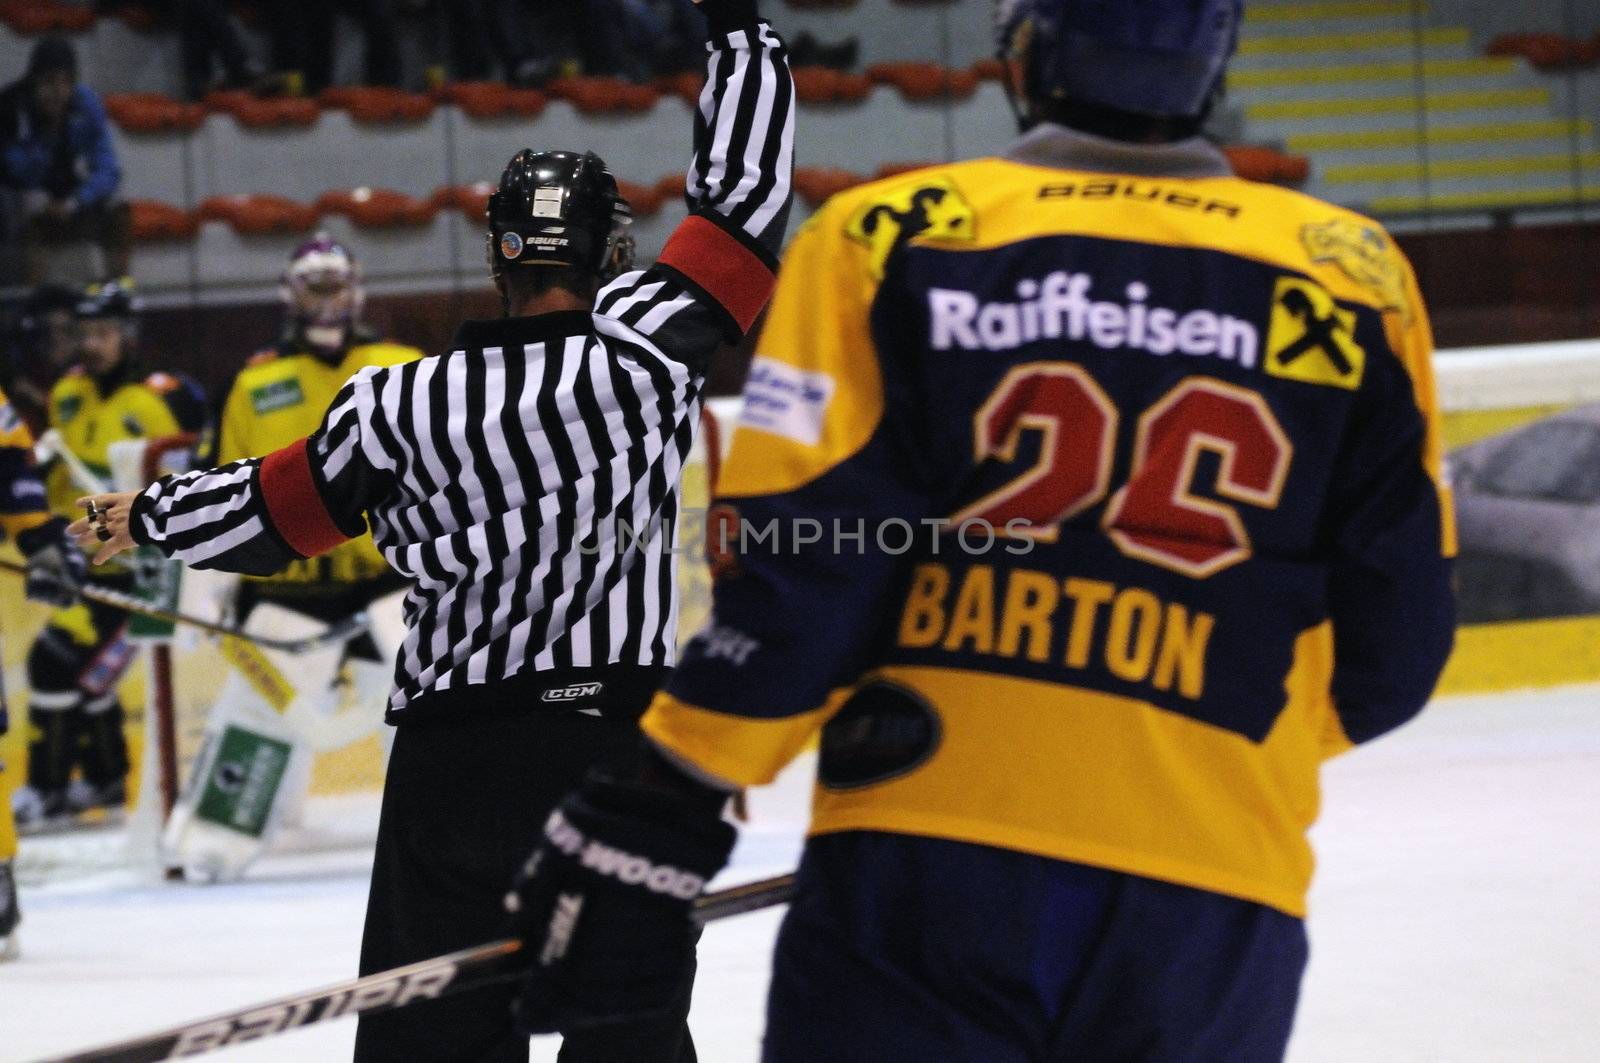 ZELL AM SEE; AUSTRIA - SEPT 24: Austrian National League. The referee gives a penalty. Game EK Zell am See vs EHC Lustenau (Result 1-8) on September 24, 2011 in Zell am See.